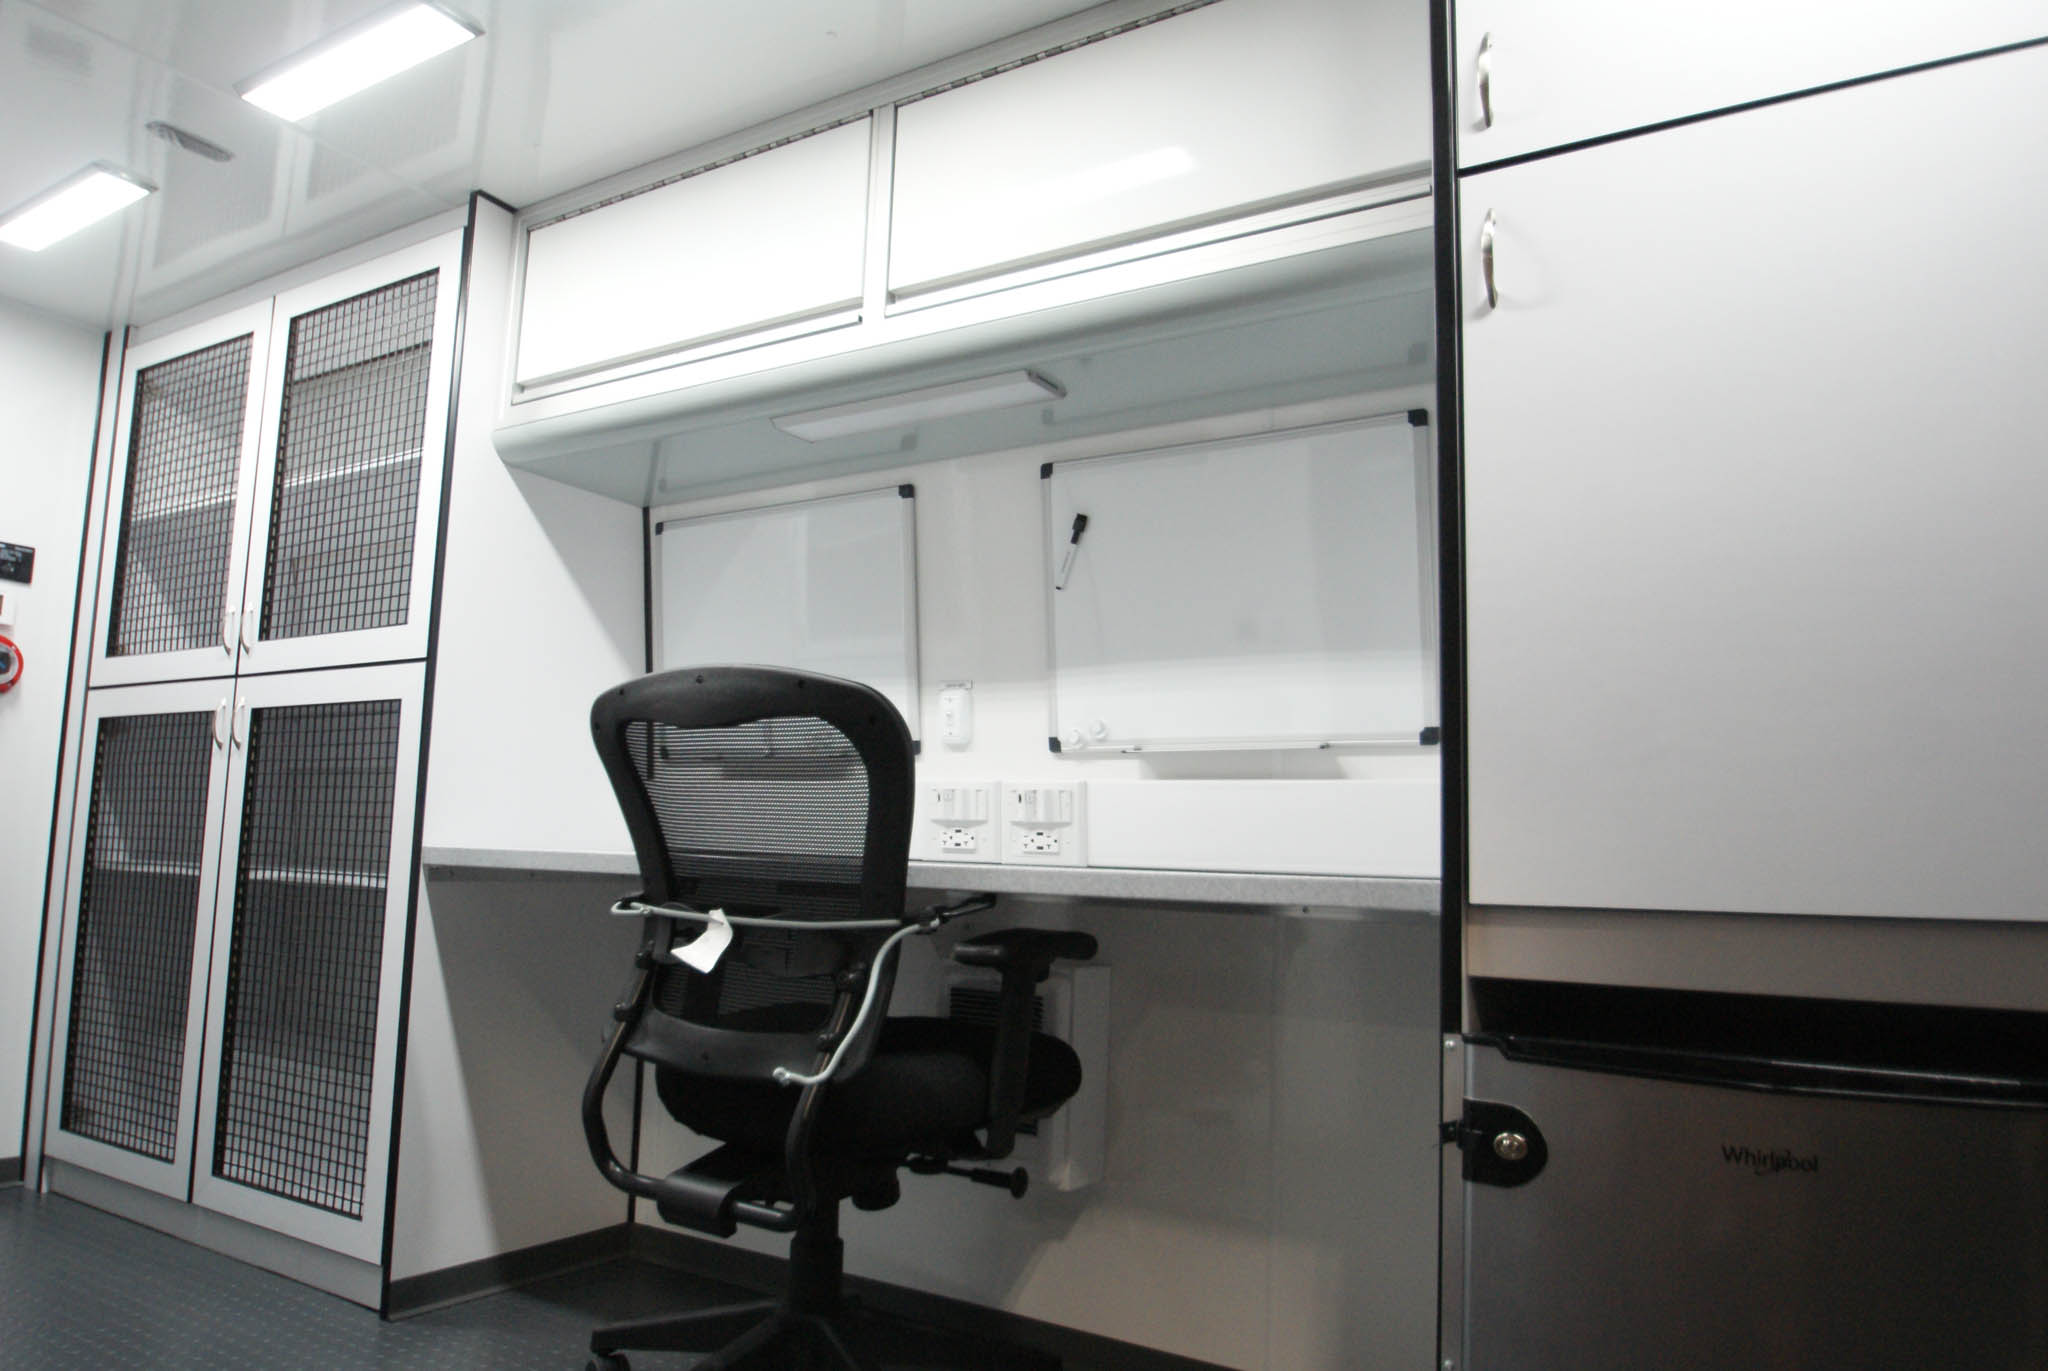 A view of the workspace, refrigerator, and cabinets inside the unit made for Escondido, CA.